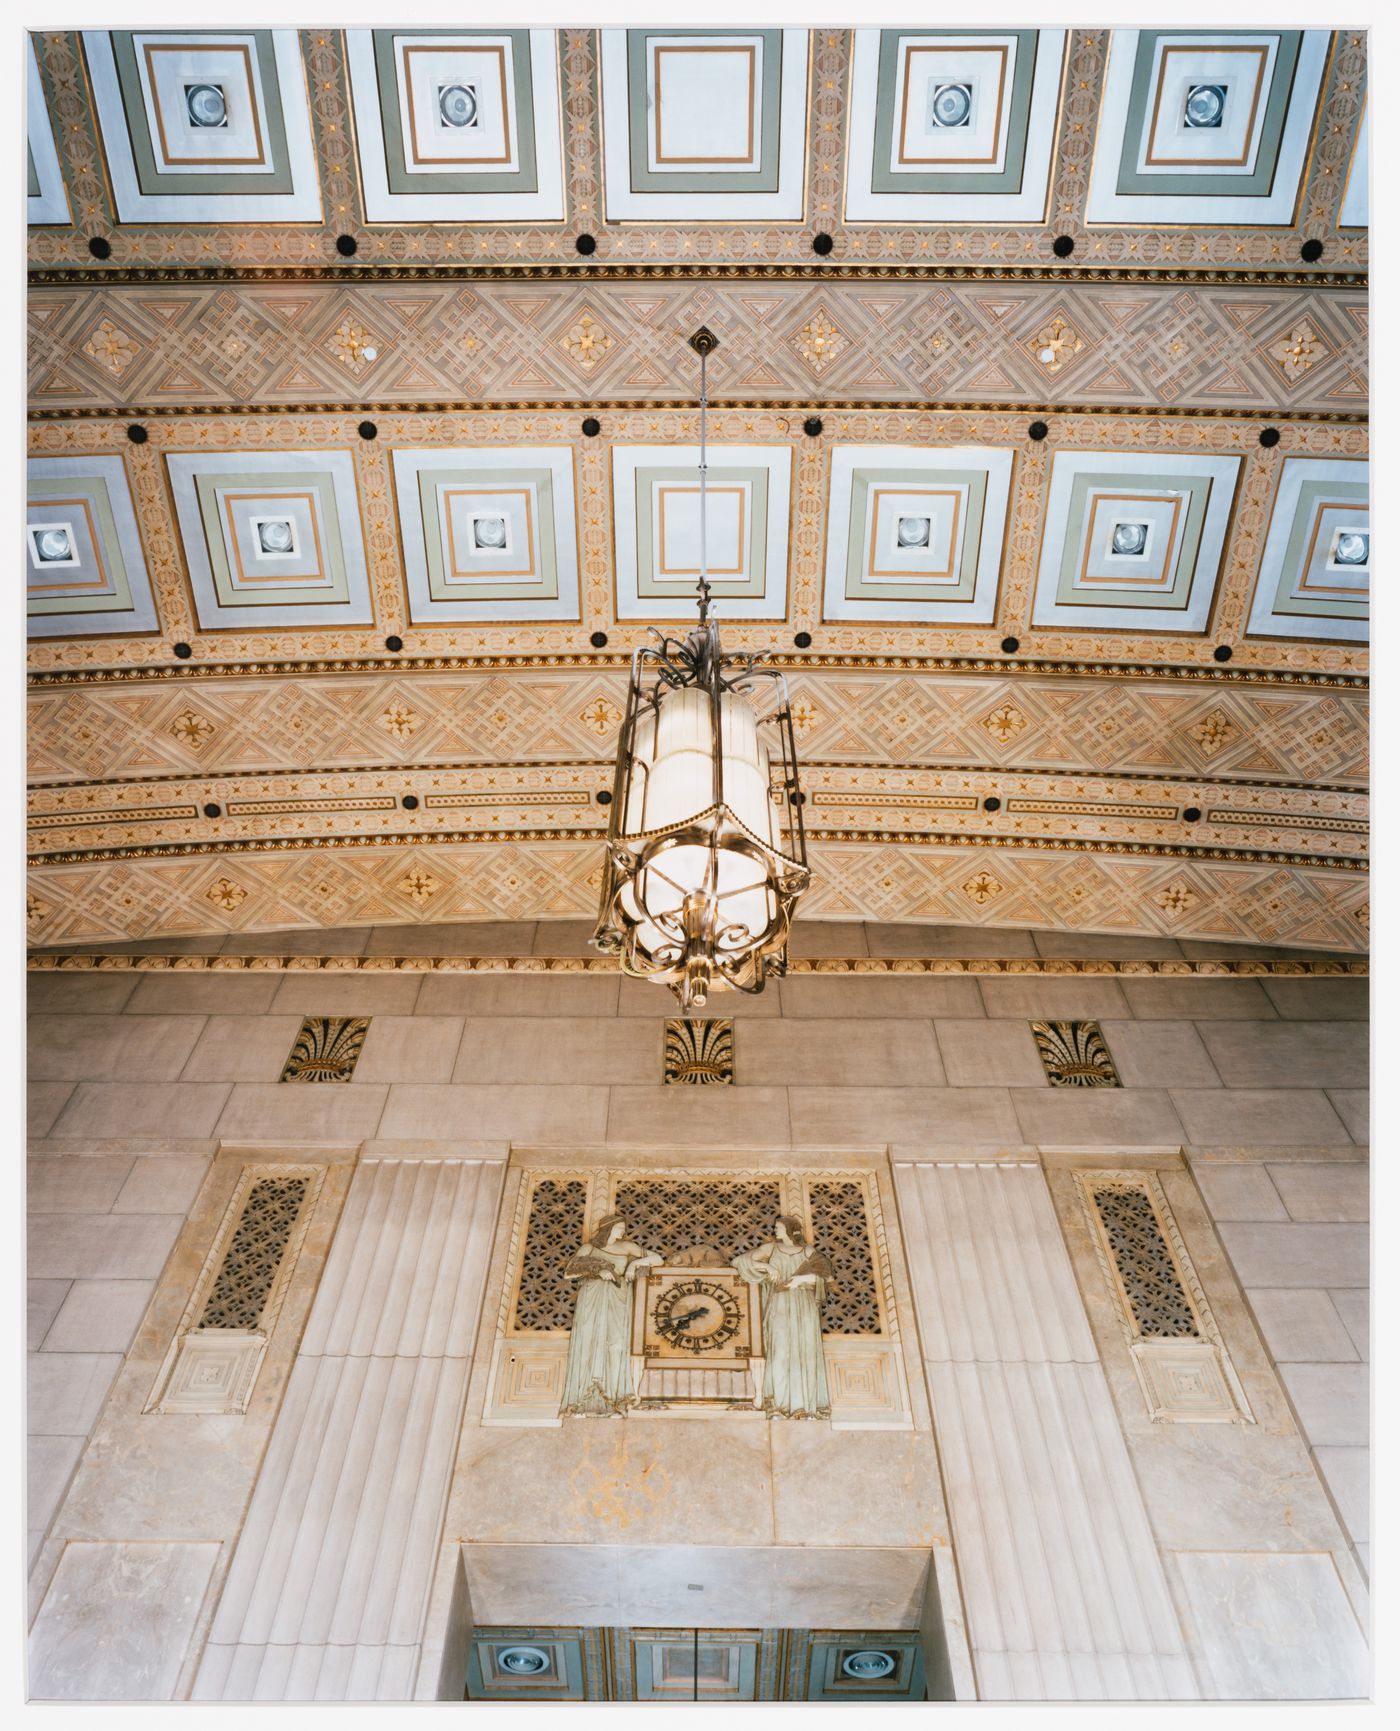 Ceiling and interior details, banking hall, Bank of Montréal, Ottawa, Ontario